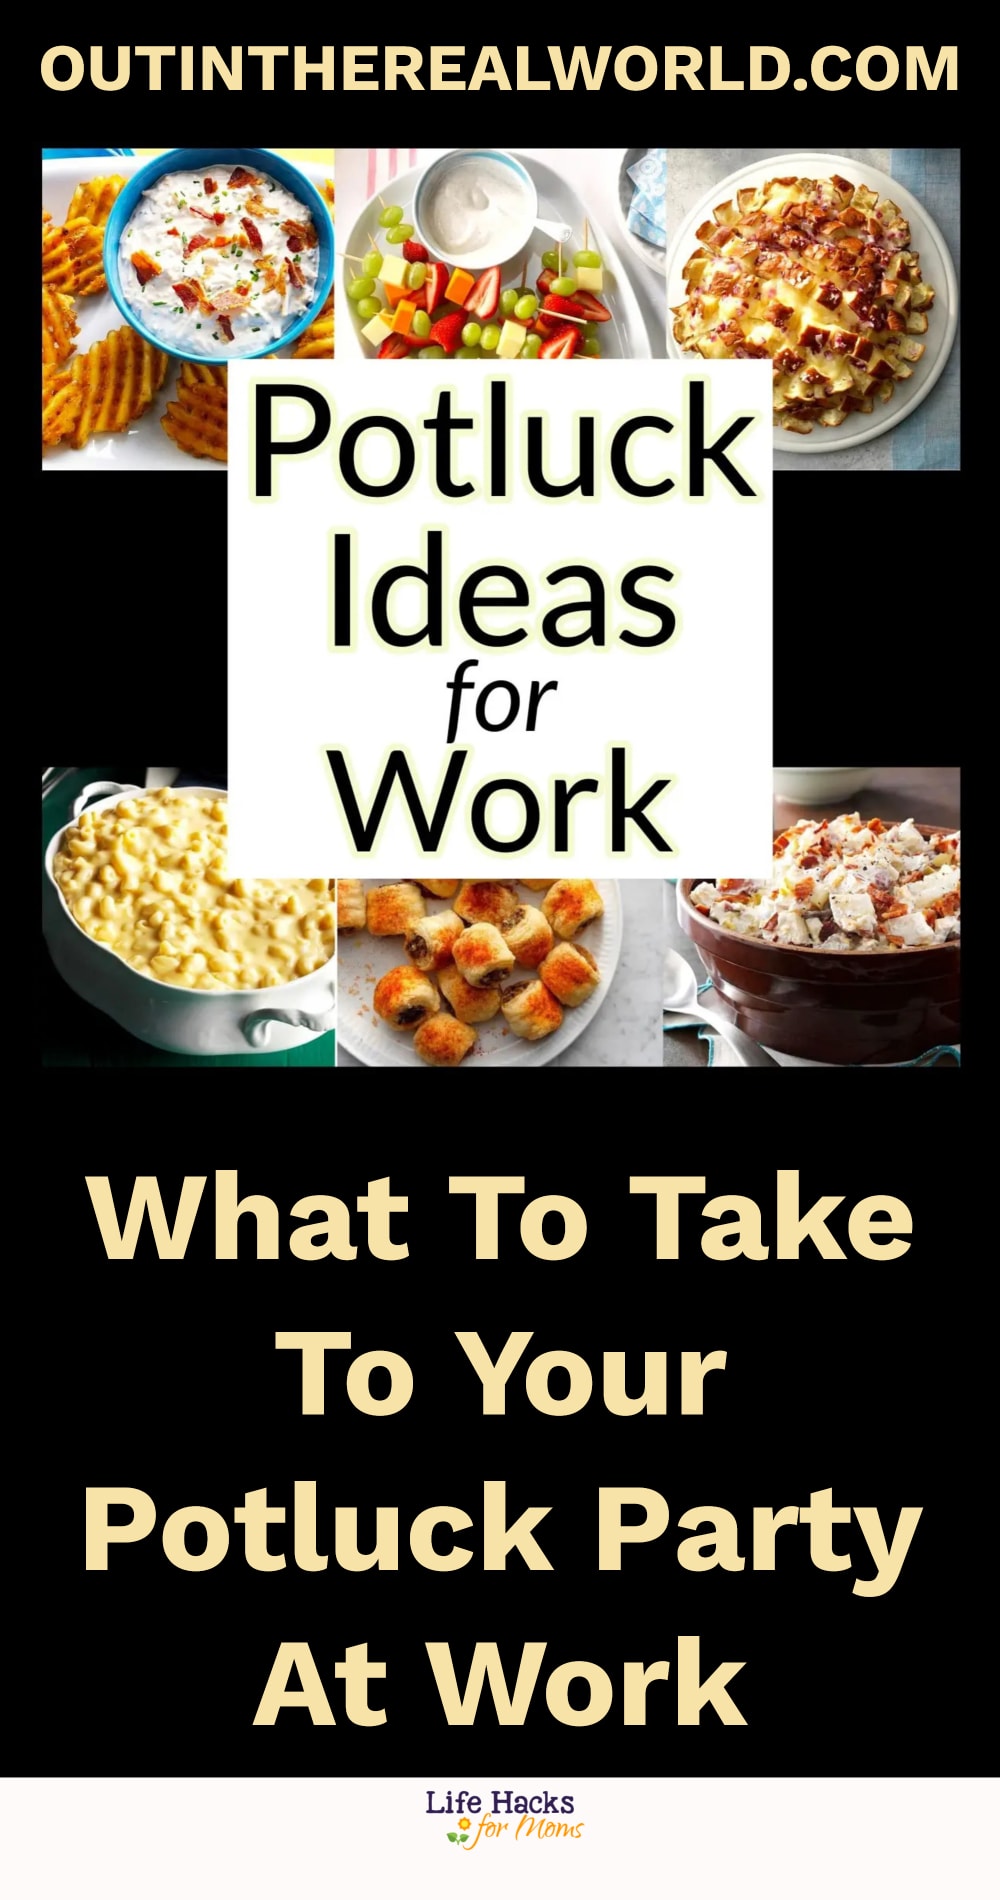 potluck dishes for work - last minute potluck ideas too